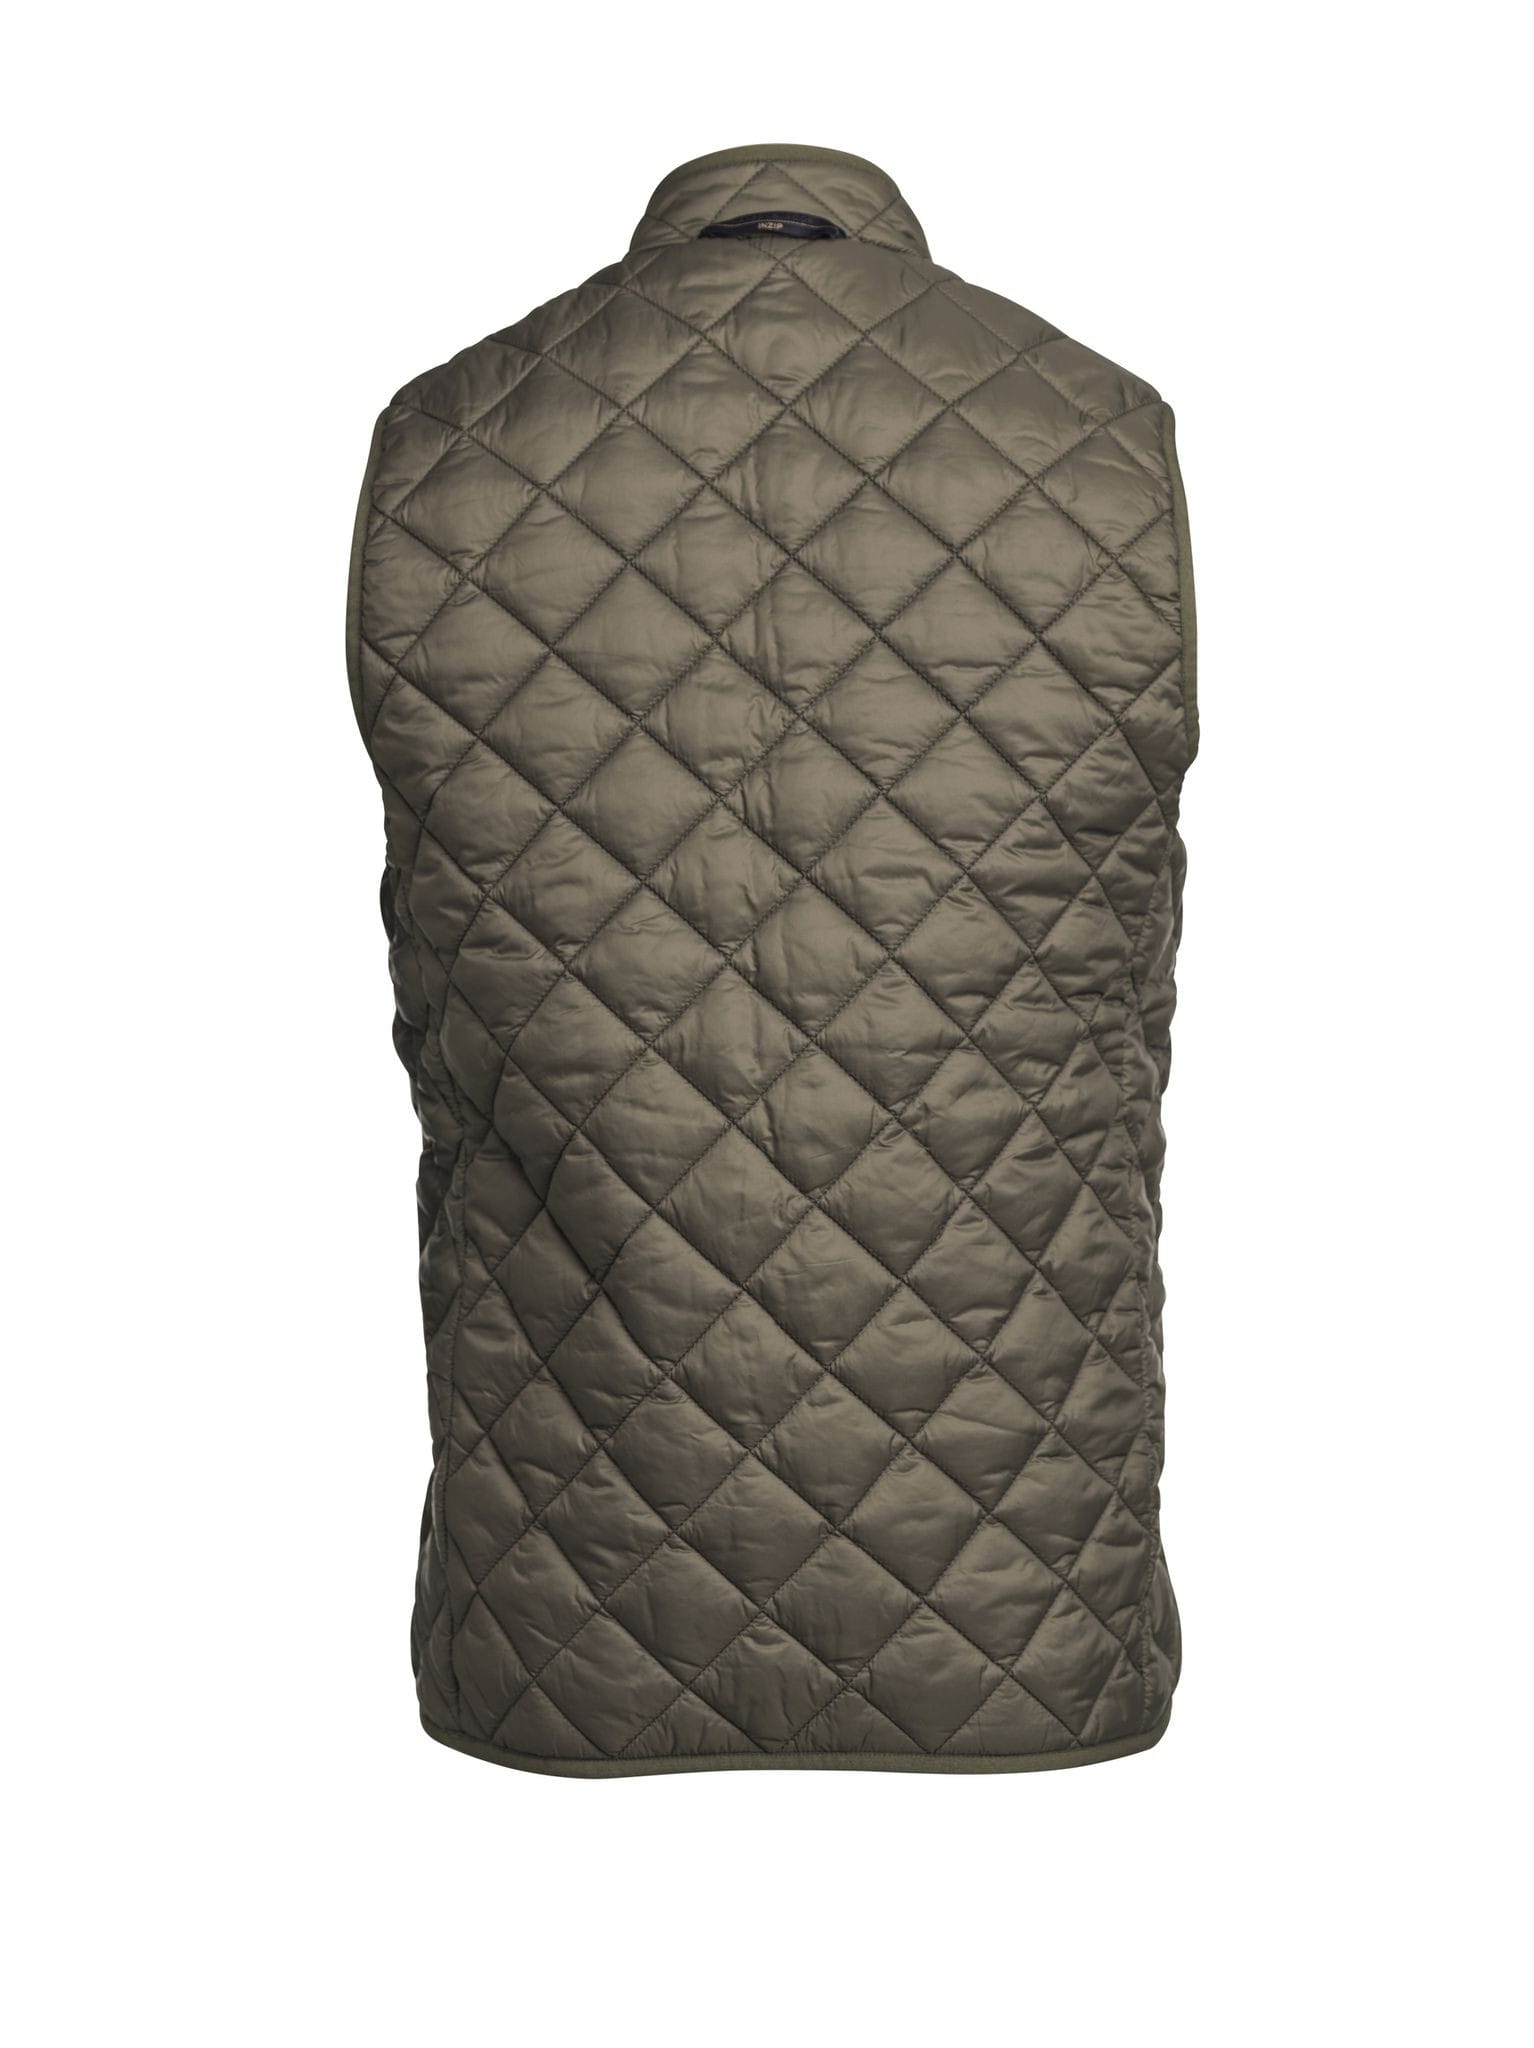 hansen-and-jacob_outerwear_04903_inzip-quilted-light-down-waistcoat_58_green_back_large